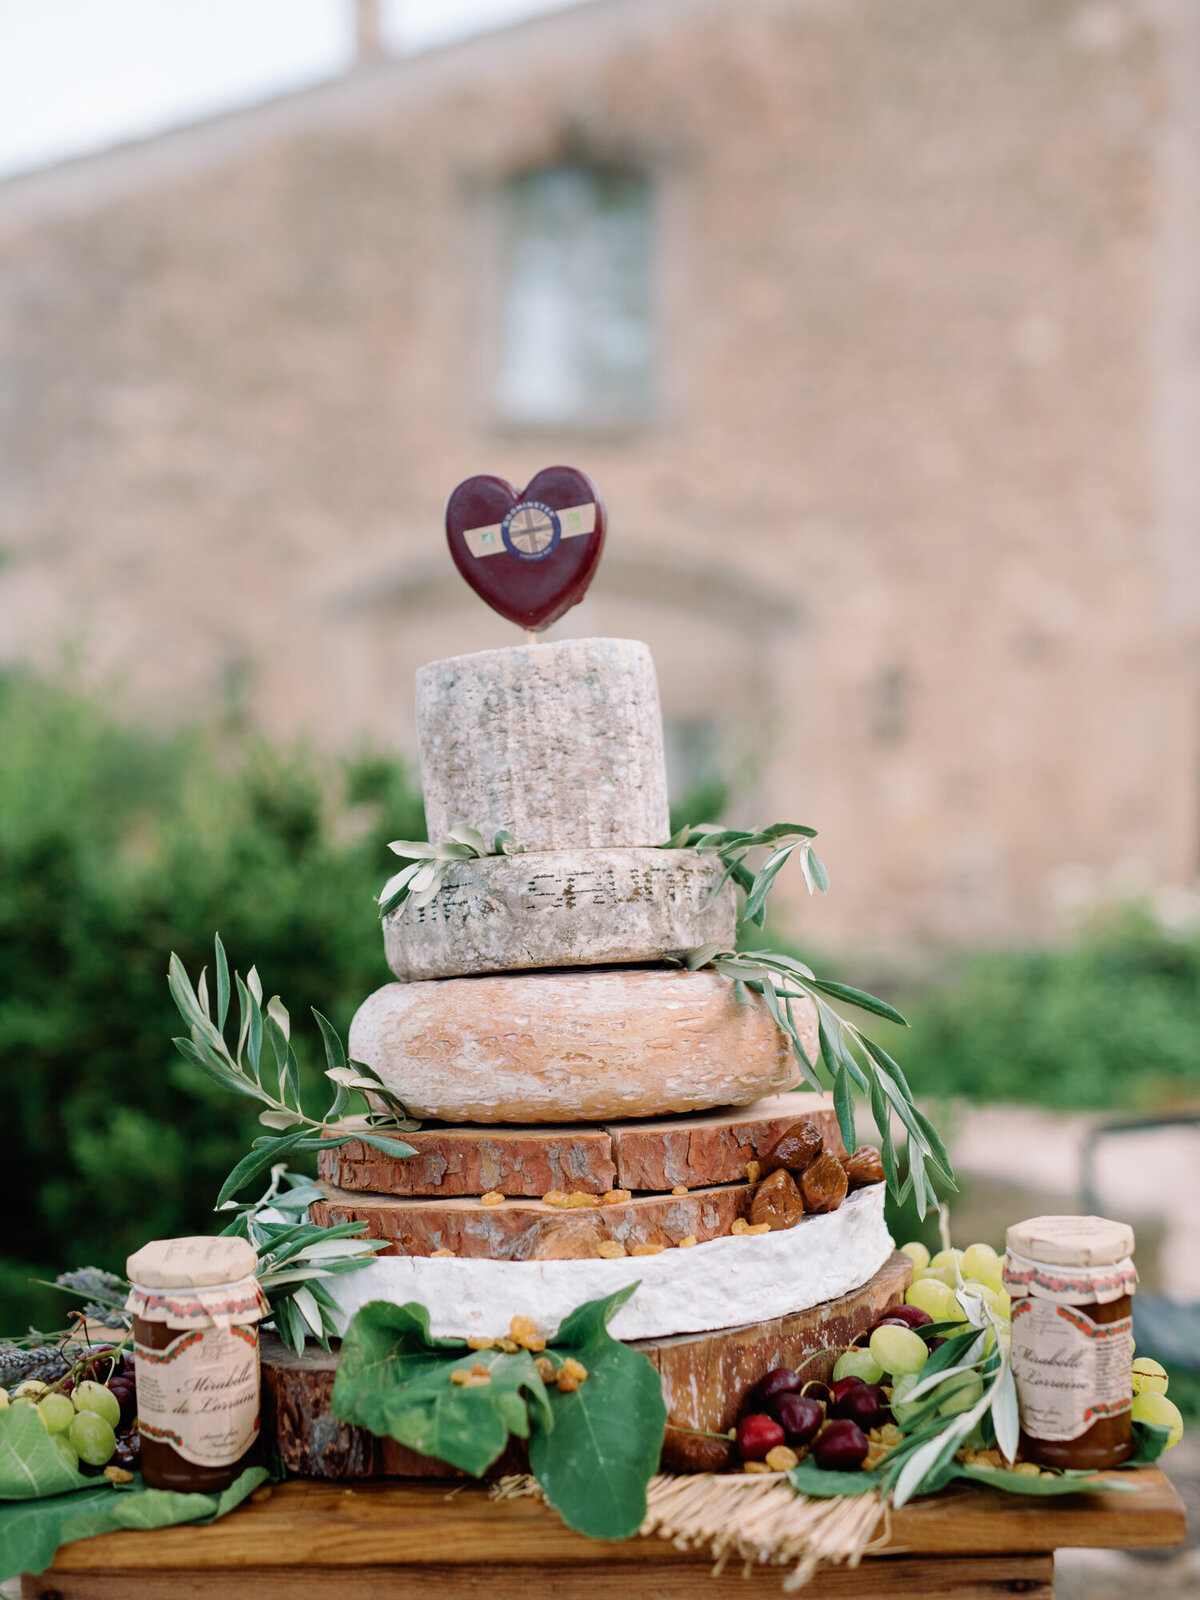 Jennifer Fox Weddings English speaking wedding planning & design agency in France crafting refined and bespoke weddings and celebrations Provence, Paris and destination AKP_Camilla&Rob_Wedding_Day-94